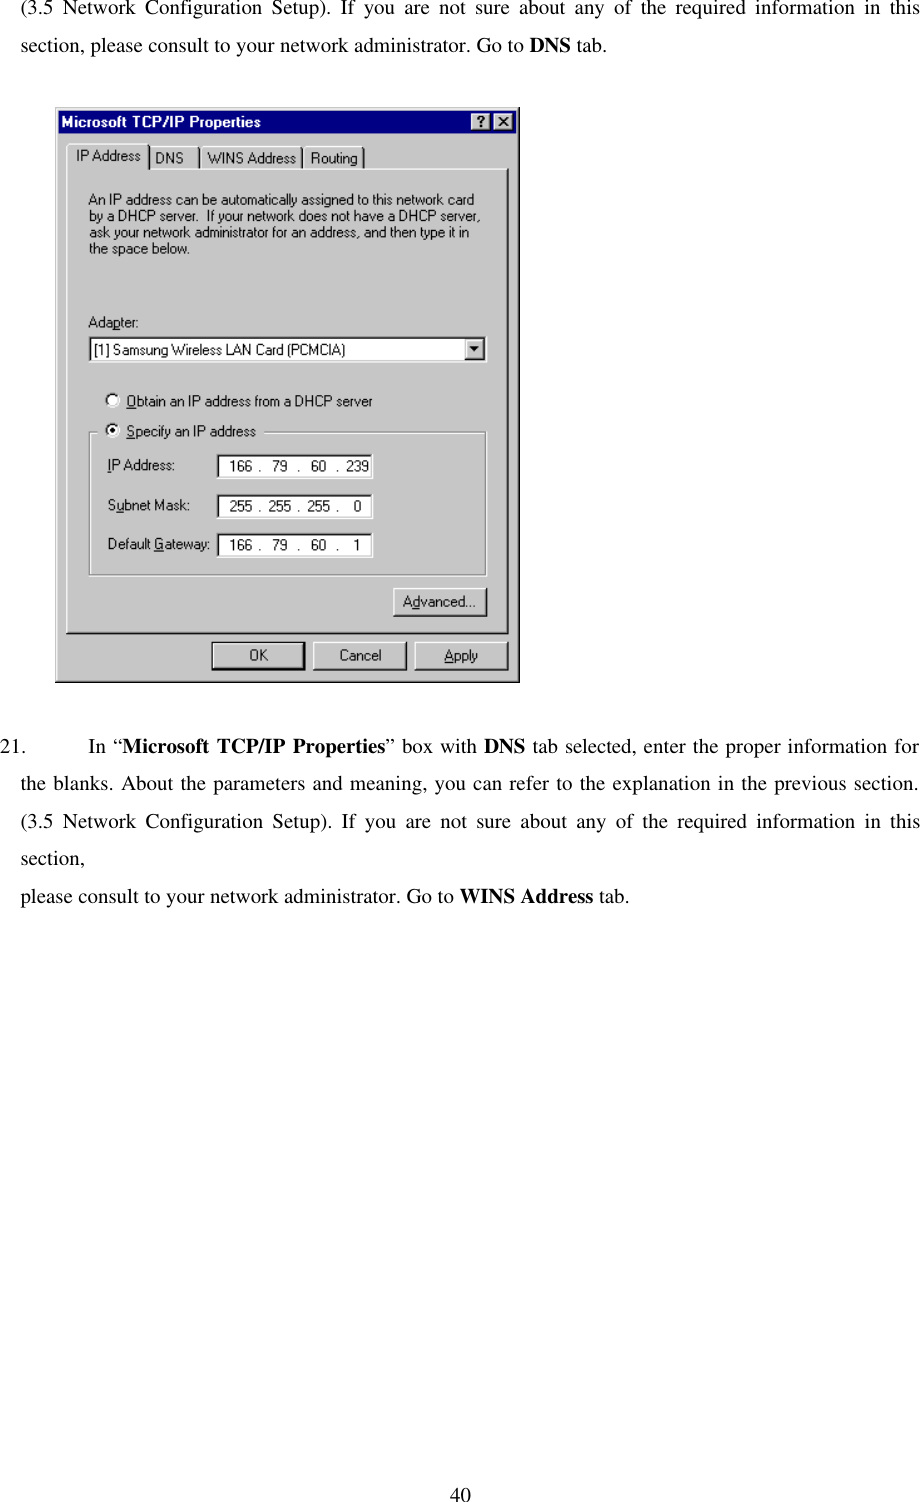  40(3.5 Network Configuration Setup). If you are not sure about any of the required information in this section, please consult to your network administrator. Go to DNS tab.               21. In “Microsoft TCP/IP Properties” box with DNS tab selected, enter the proper information for the blanks. About the parameters and meaning, you can refer to the explanation in the previous section. (3.5 Network Configuration Setup). If you are not sure about any of the required information in this section,  please consult to your network administrator. Go to WINS Address tab.   